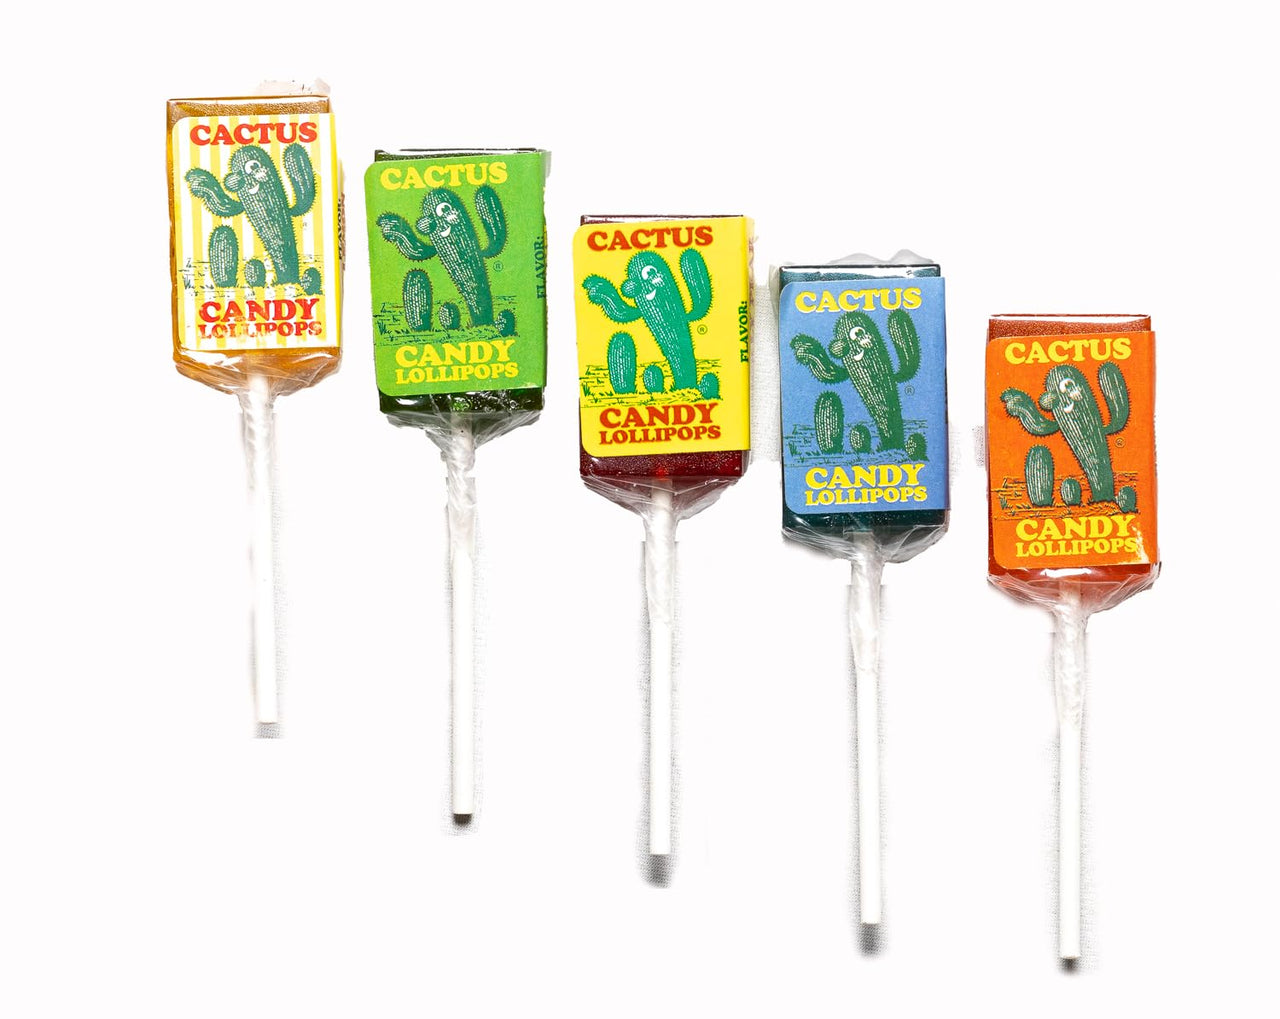 Lollipops Assorted Flavors - Five Pack of 1 oz Prickly Pear Lollipops - Prickly Pear, Blueberry, Watermelon Orange and Lemon, made by Cactus Candy Company, (5 Pack)